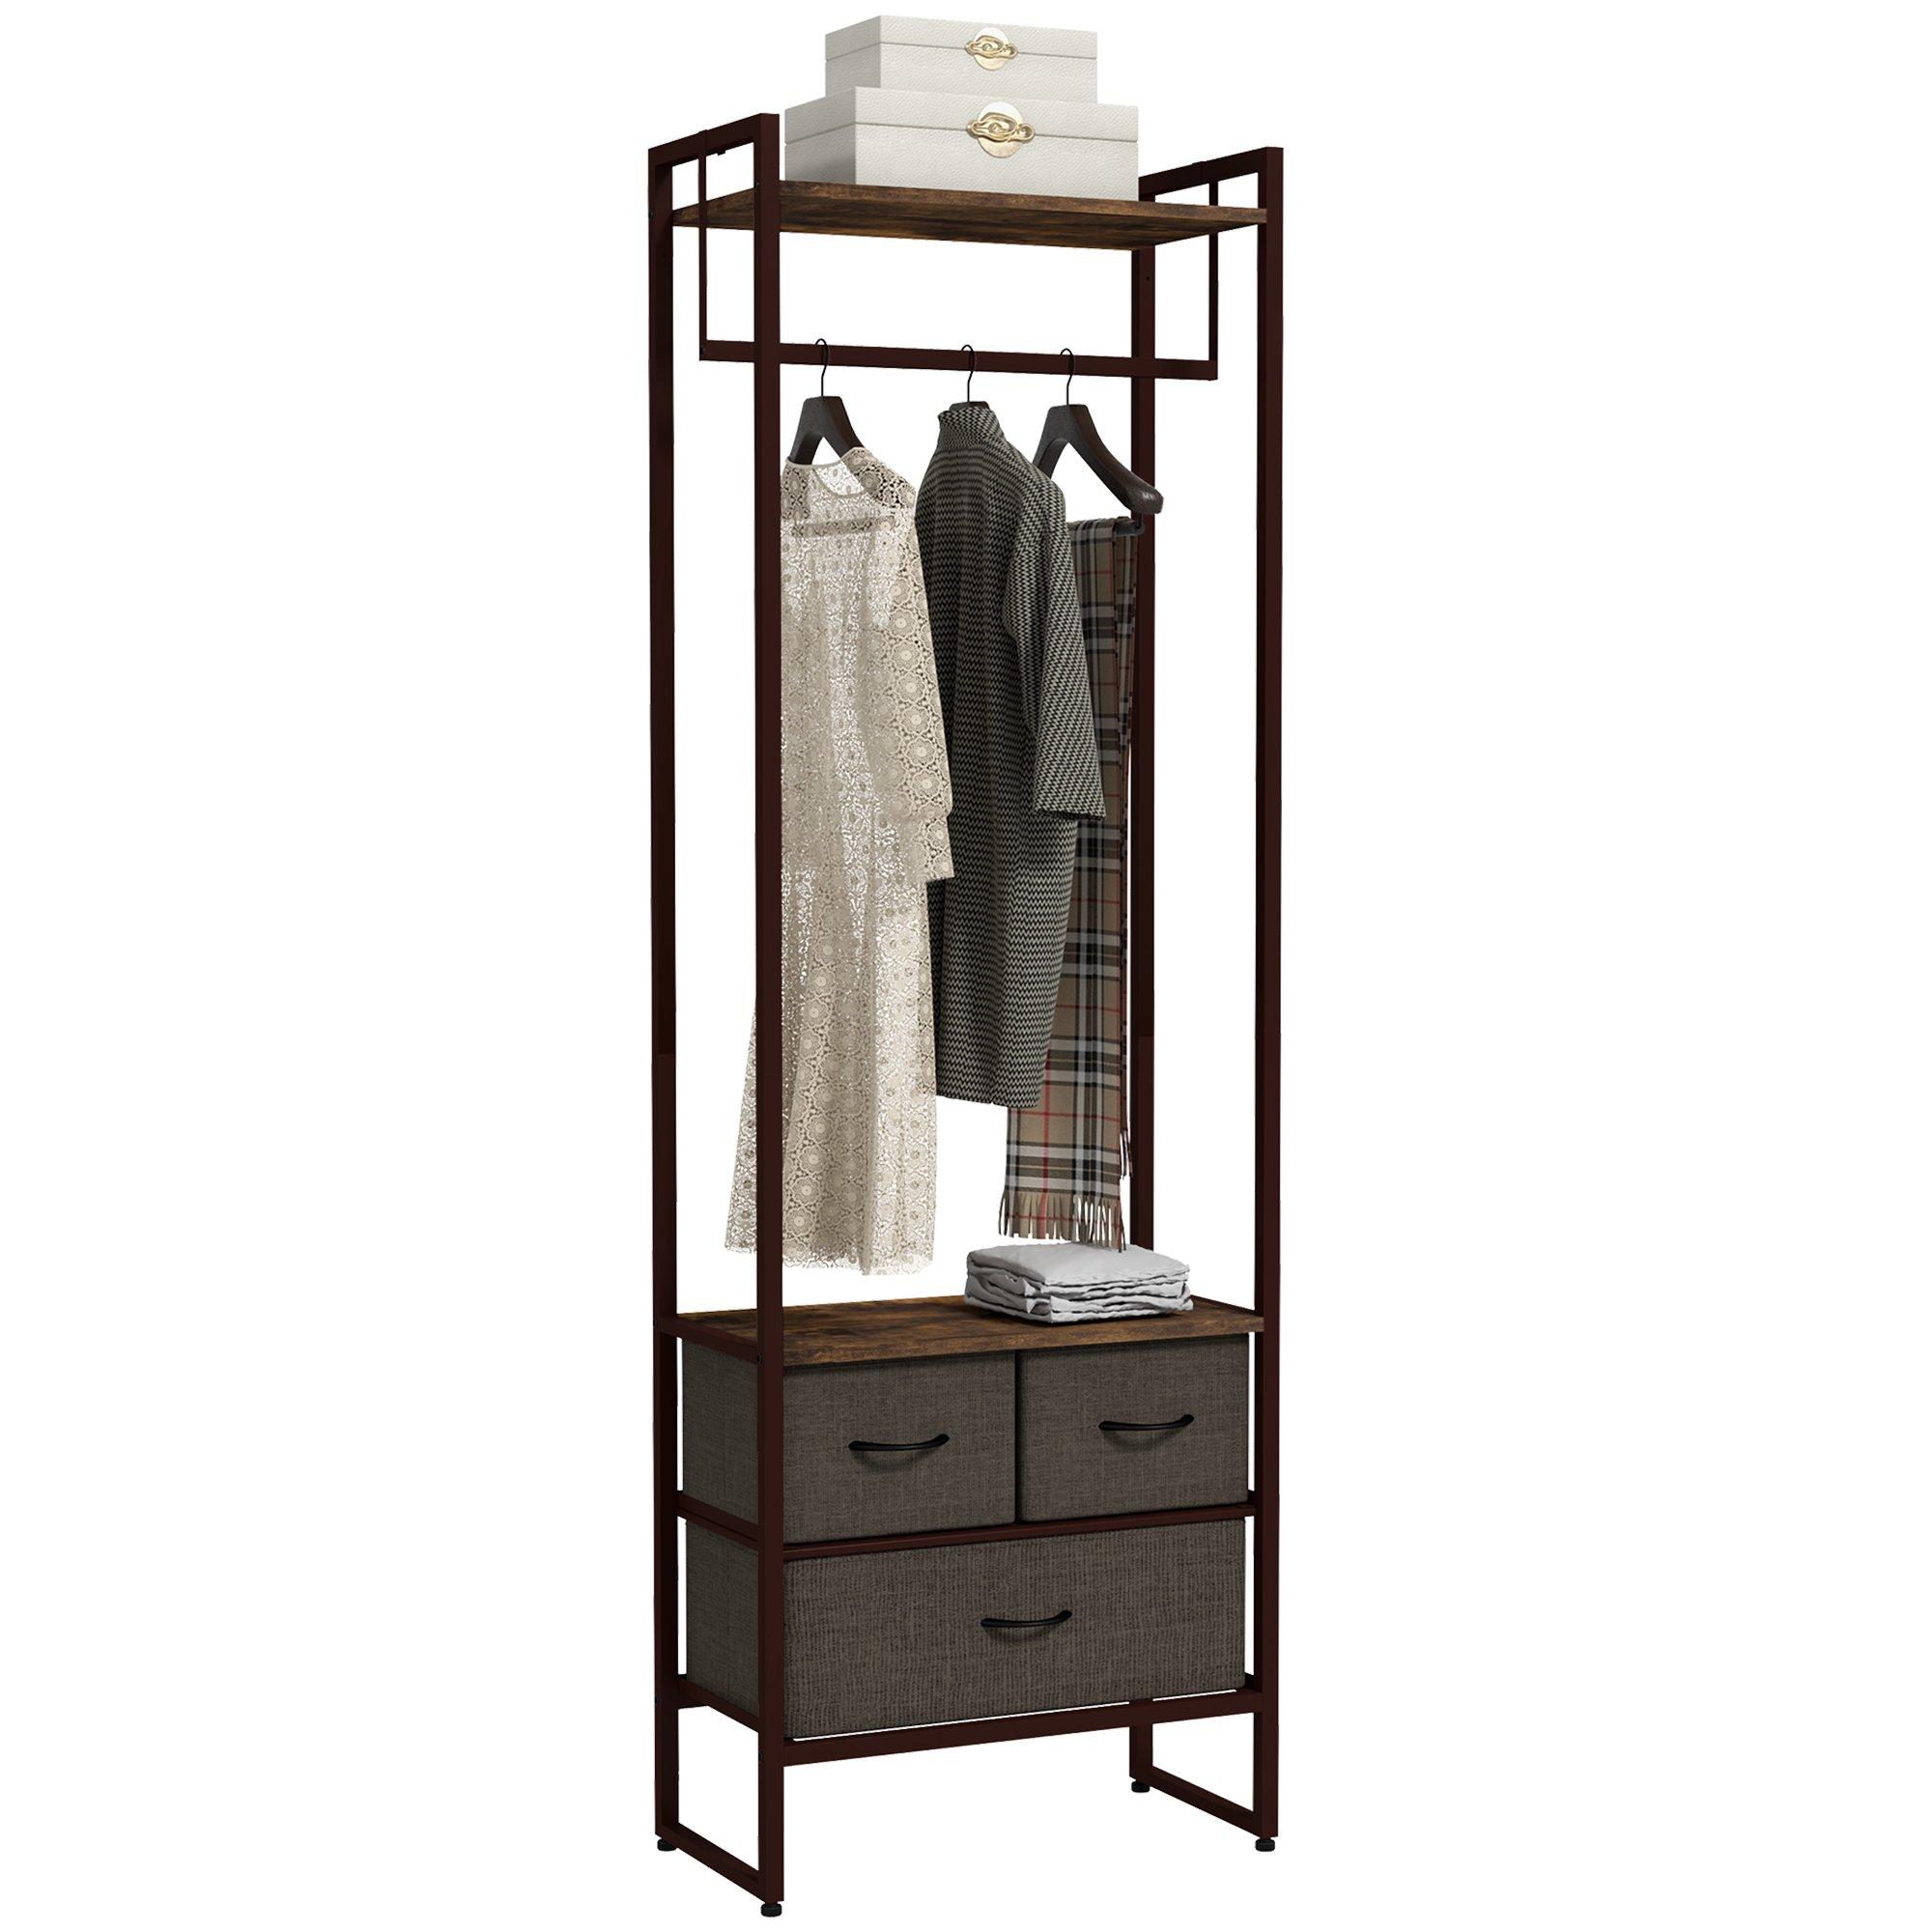 Free Standing Clothes Rail Garment Rack with 3 Fabric Drawers